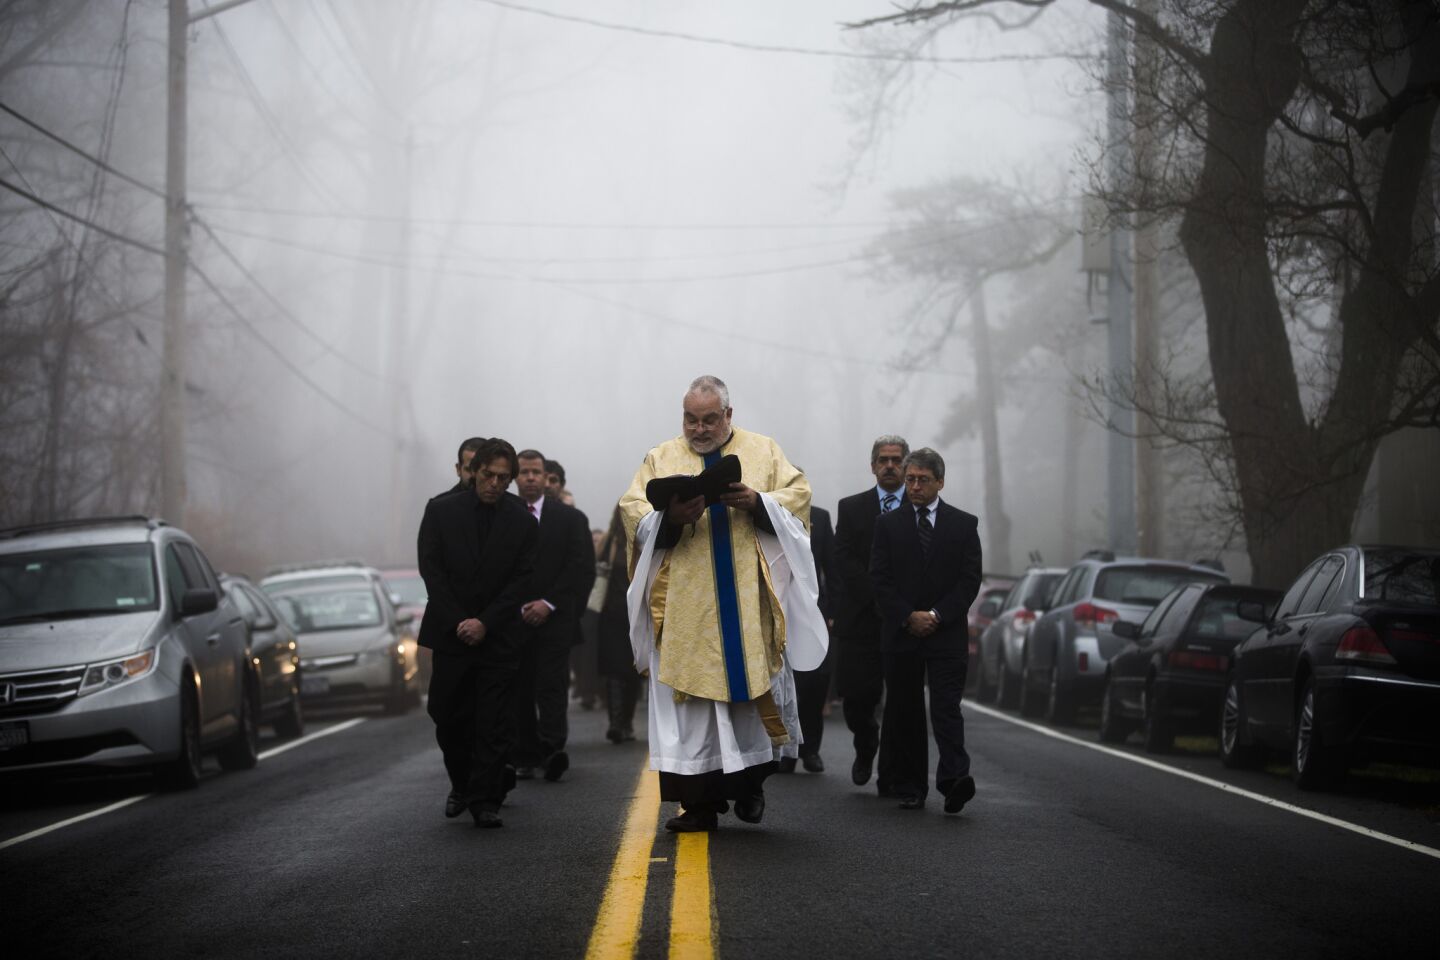 Father Eric Consentino and mourners follow a hearse carrying the casket of James Ferrari from the Church of the Divine Love toward his grave. Ferrari, 59, was killed along with three others when a speeding Metro-North Railroad train on the Hudson Line derailed in New York City.